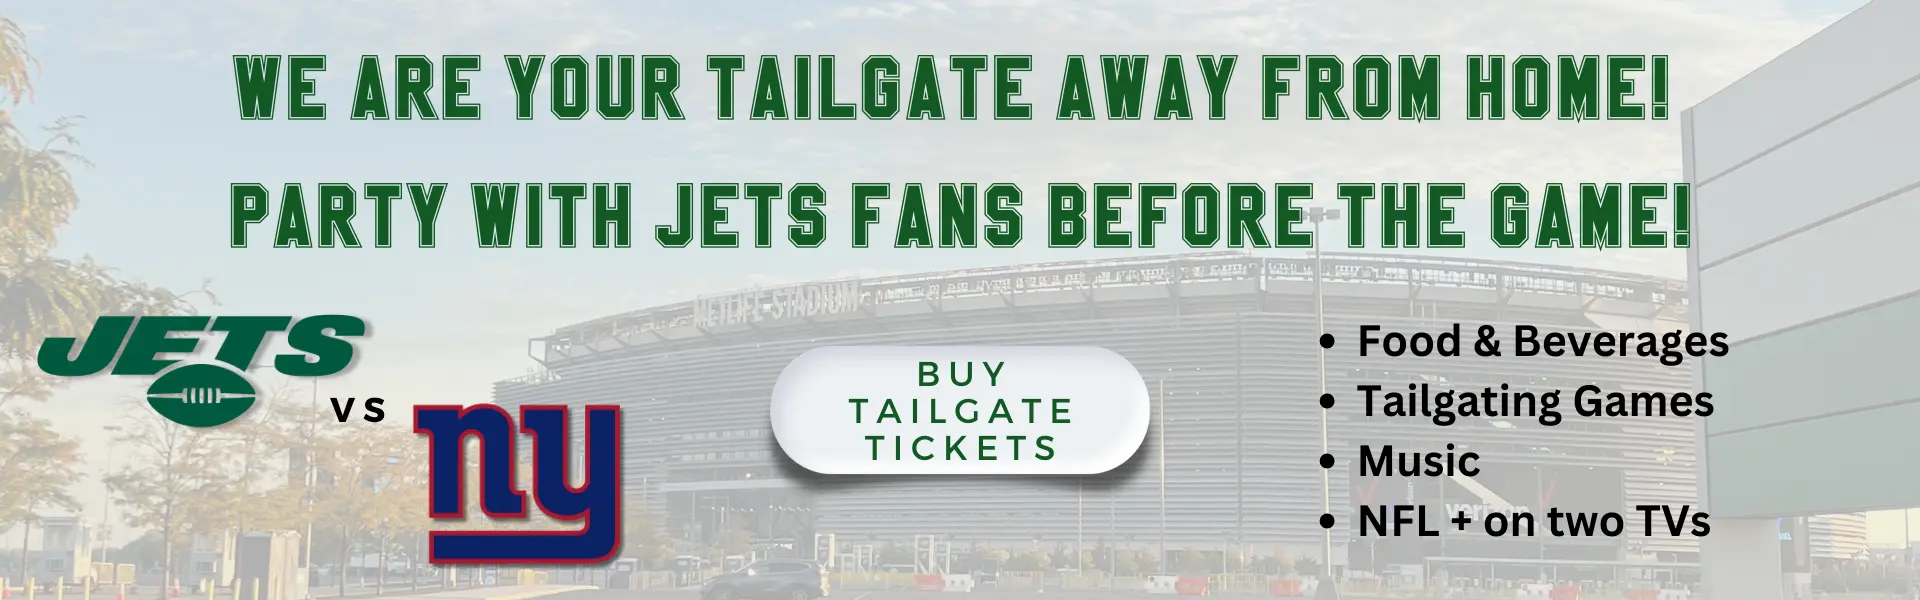 Mets vs Yankees [Tailgate Only] - Long Island Tailgate